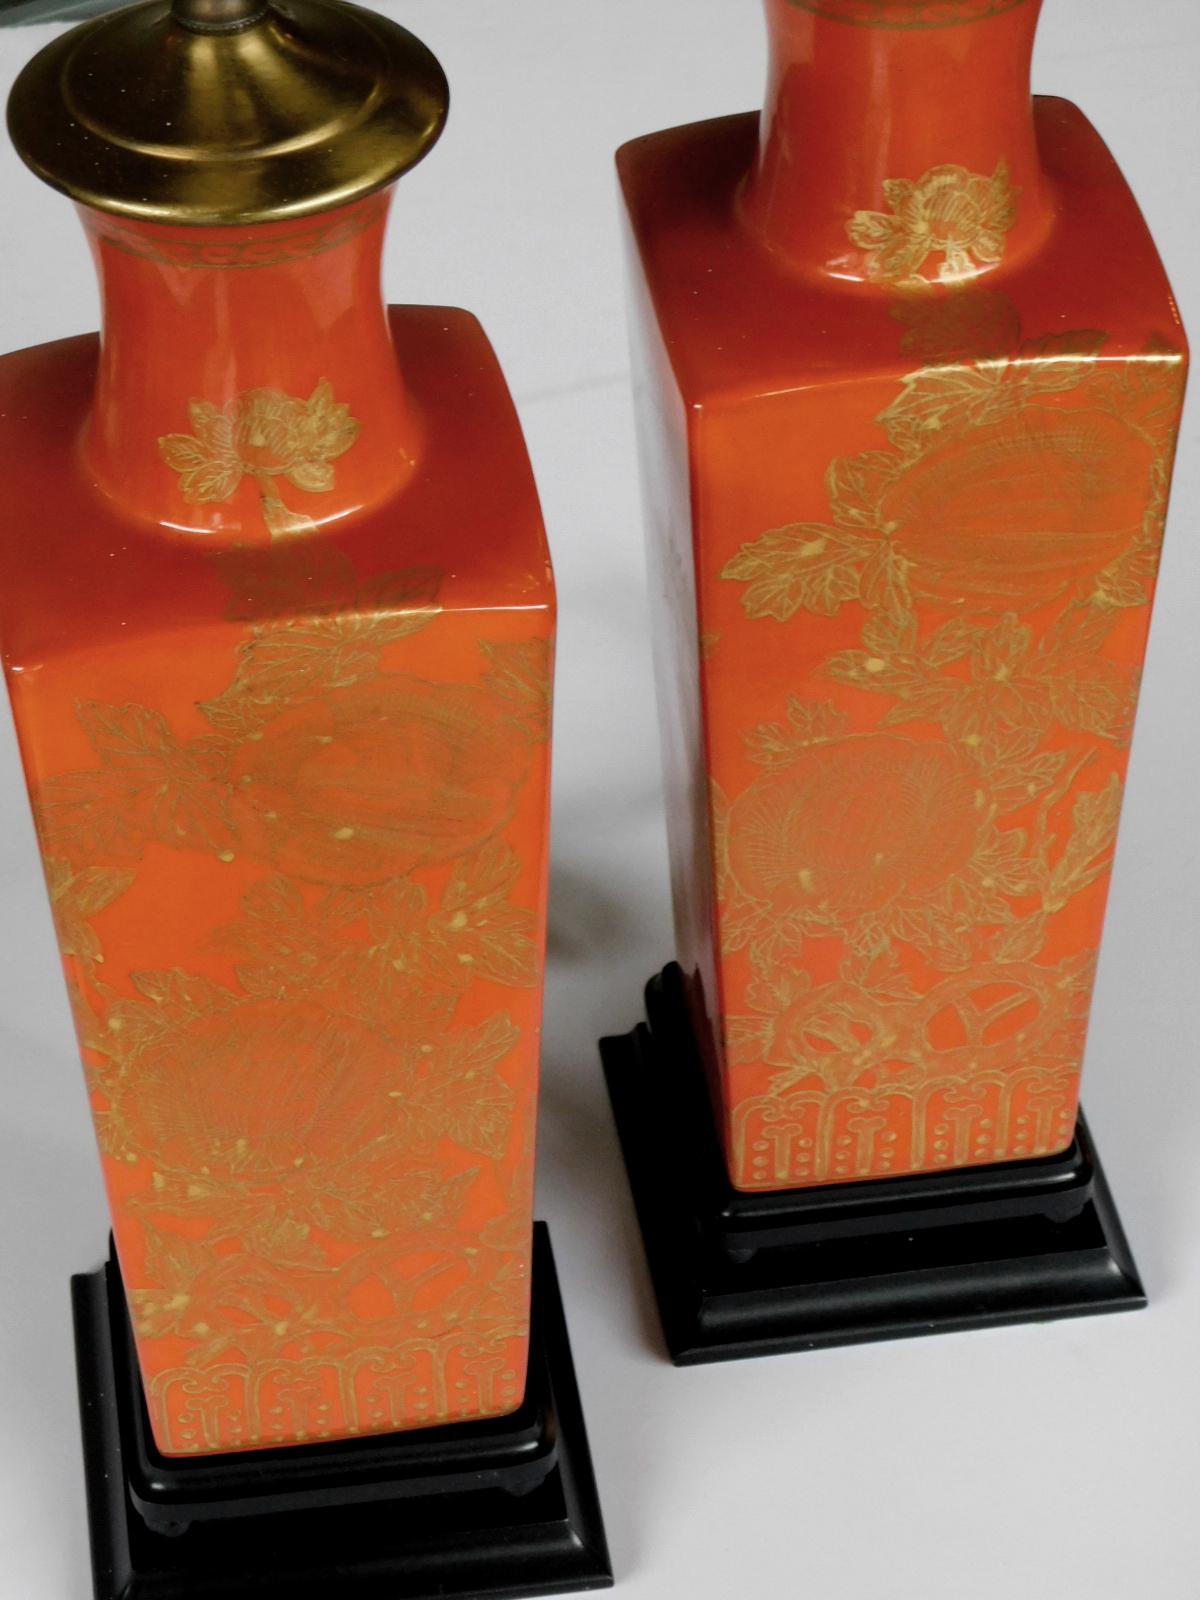 Each with flaring neck above square-form tapering body all in a richly-colored red-orange glaze decorated with subtle gilt floral vines; resting on a wooden ebonized based